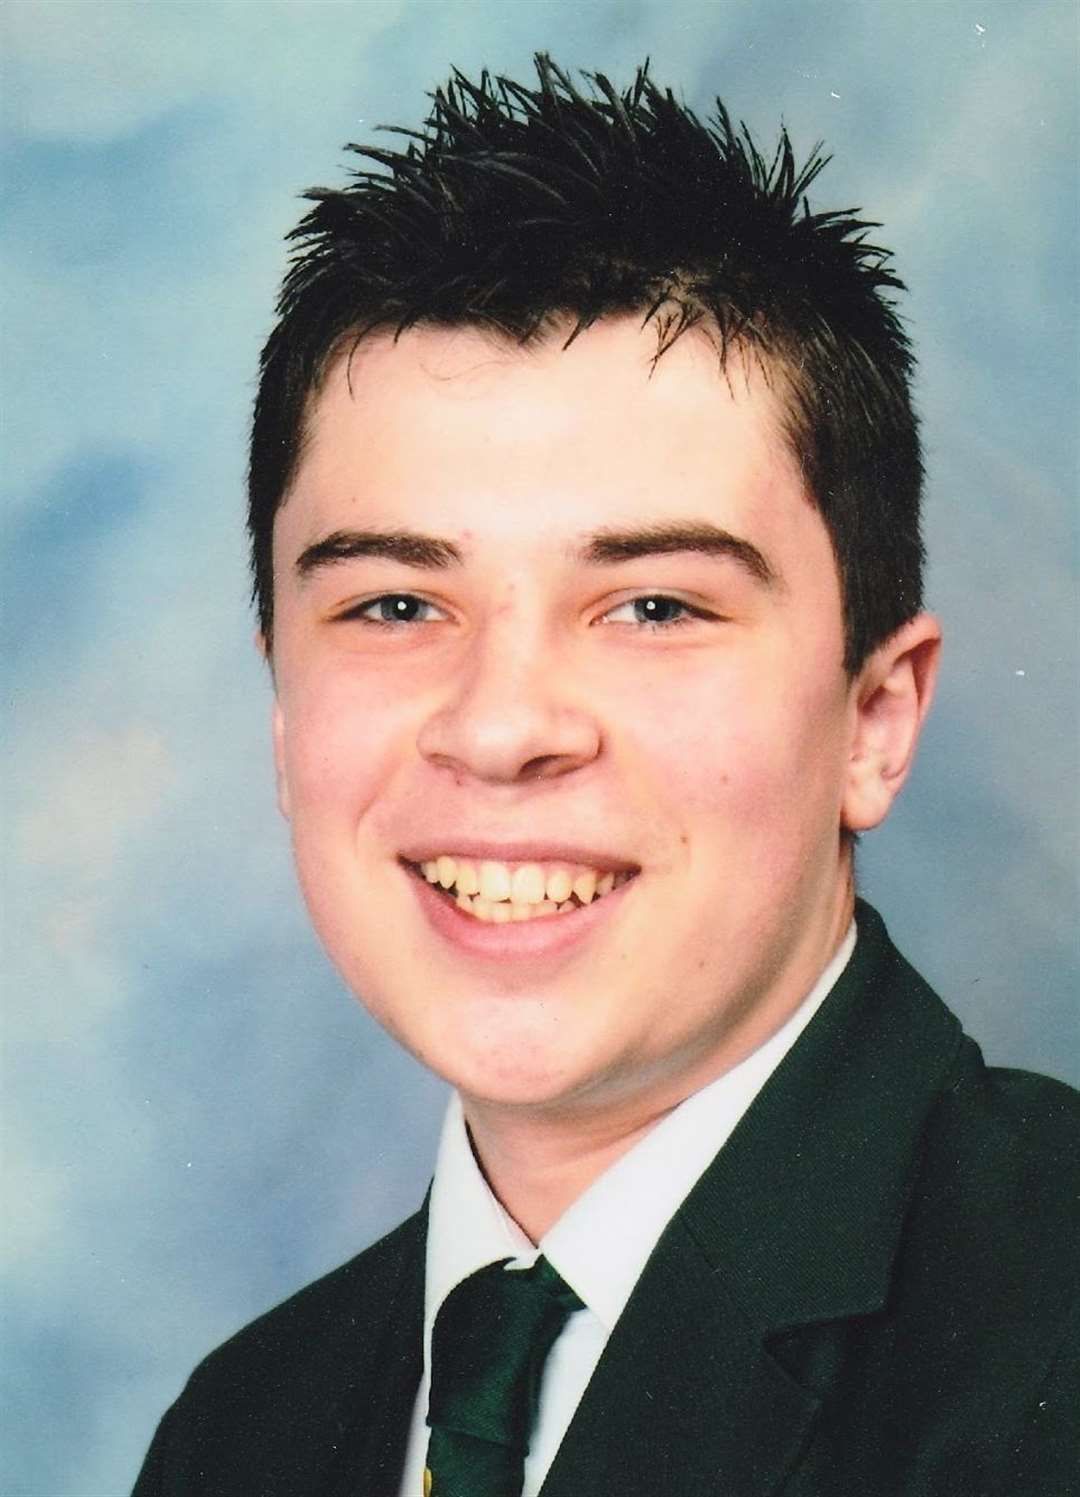 Josh Stock as a schoolboy. He died aged 27 after being diagnosed with cancer